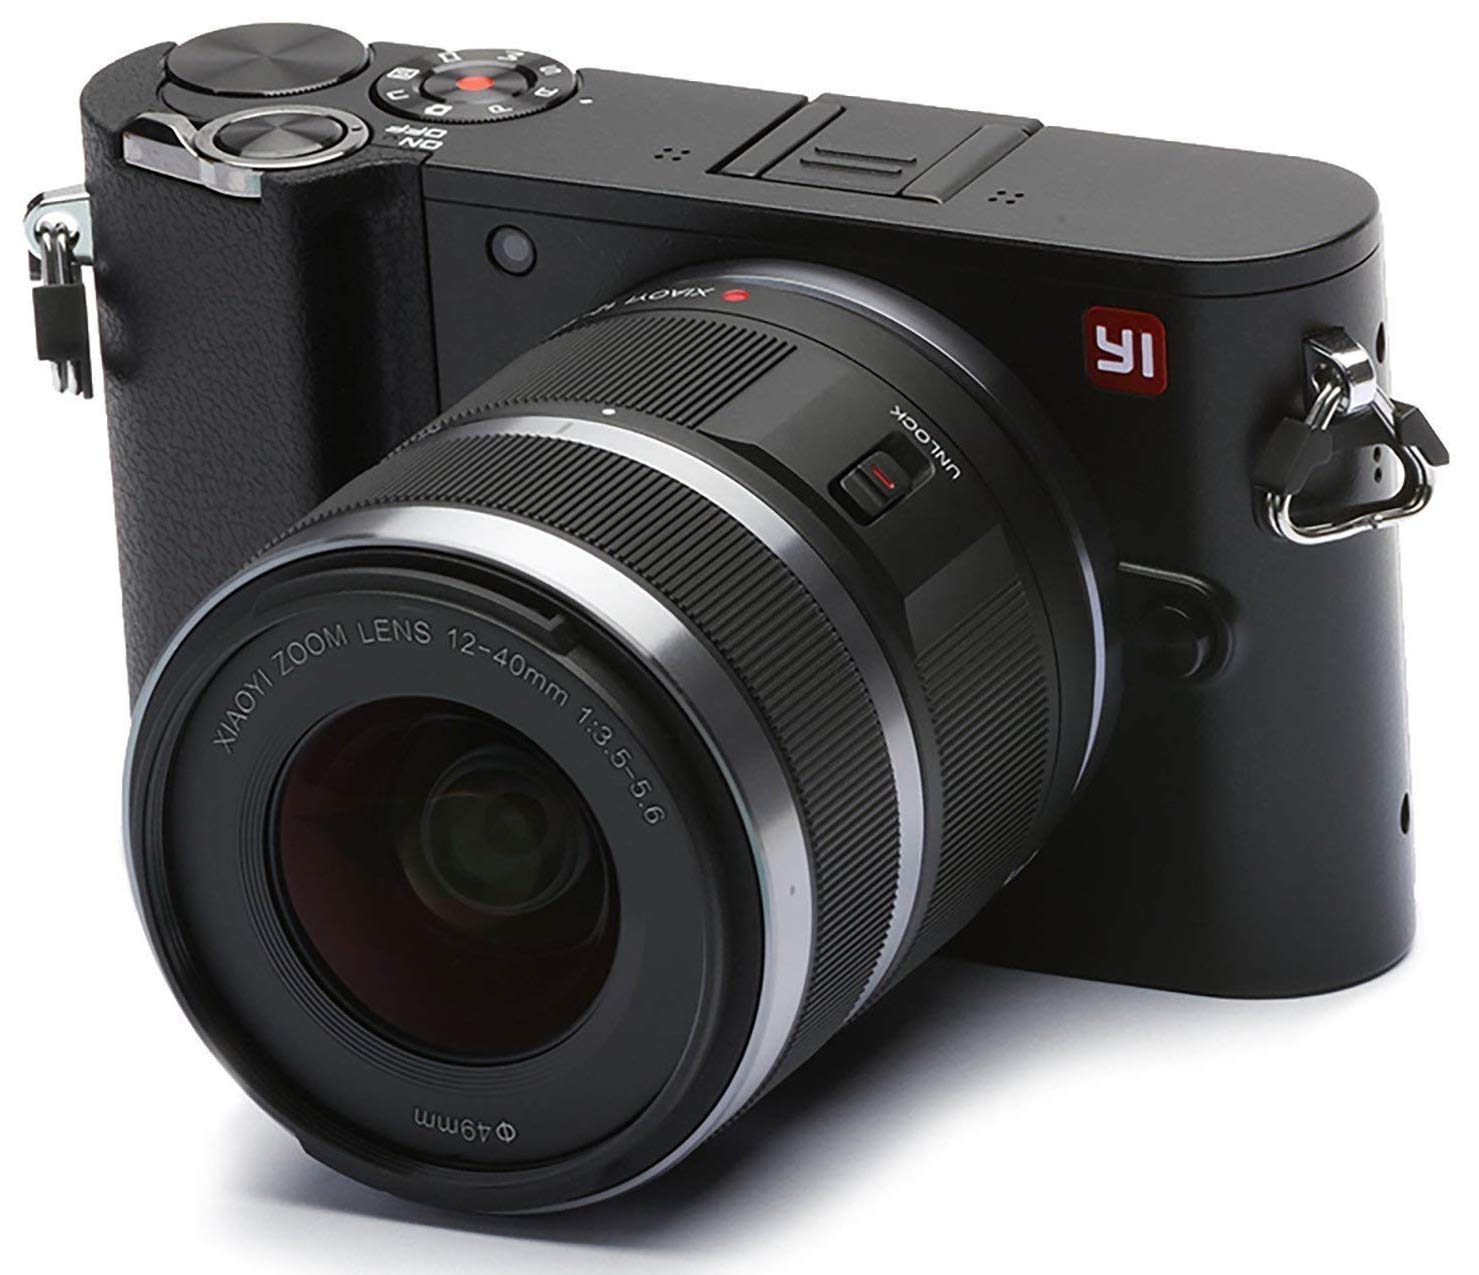 Here is a 4k 20MP mirrorless MFT interchangeable lens camera with 12